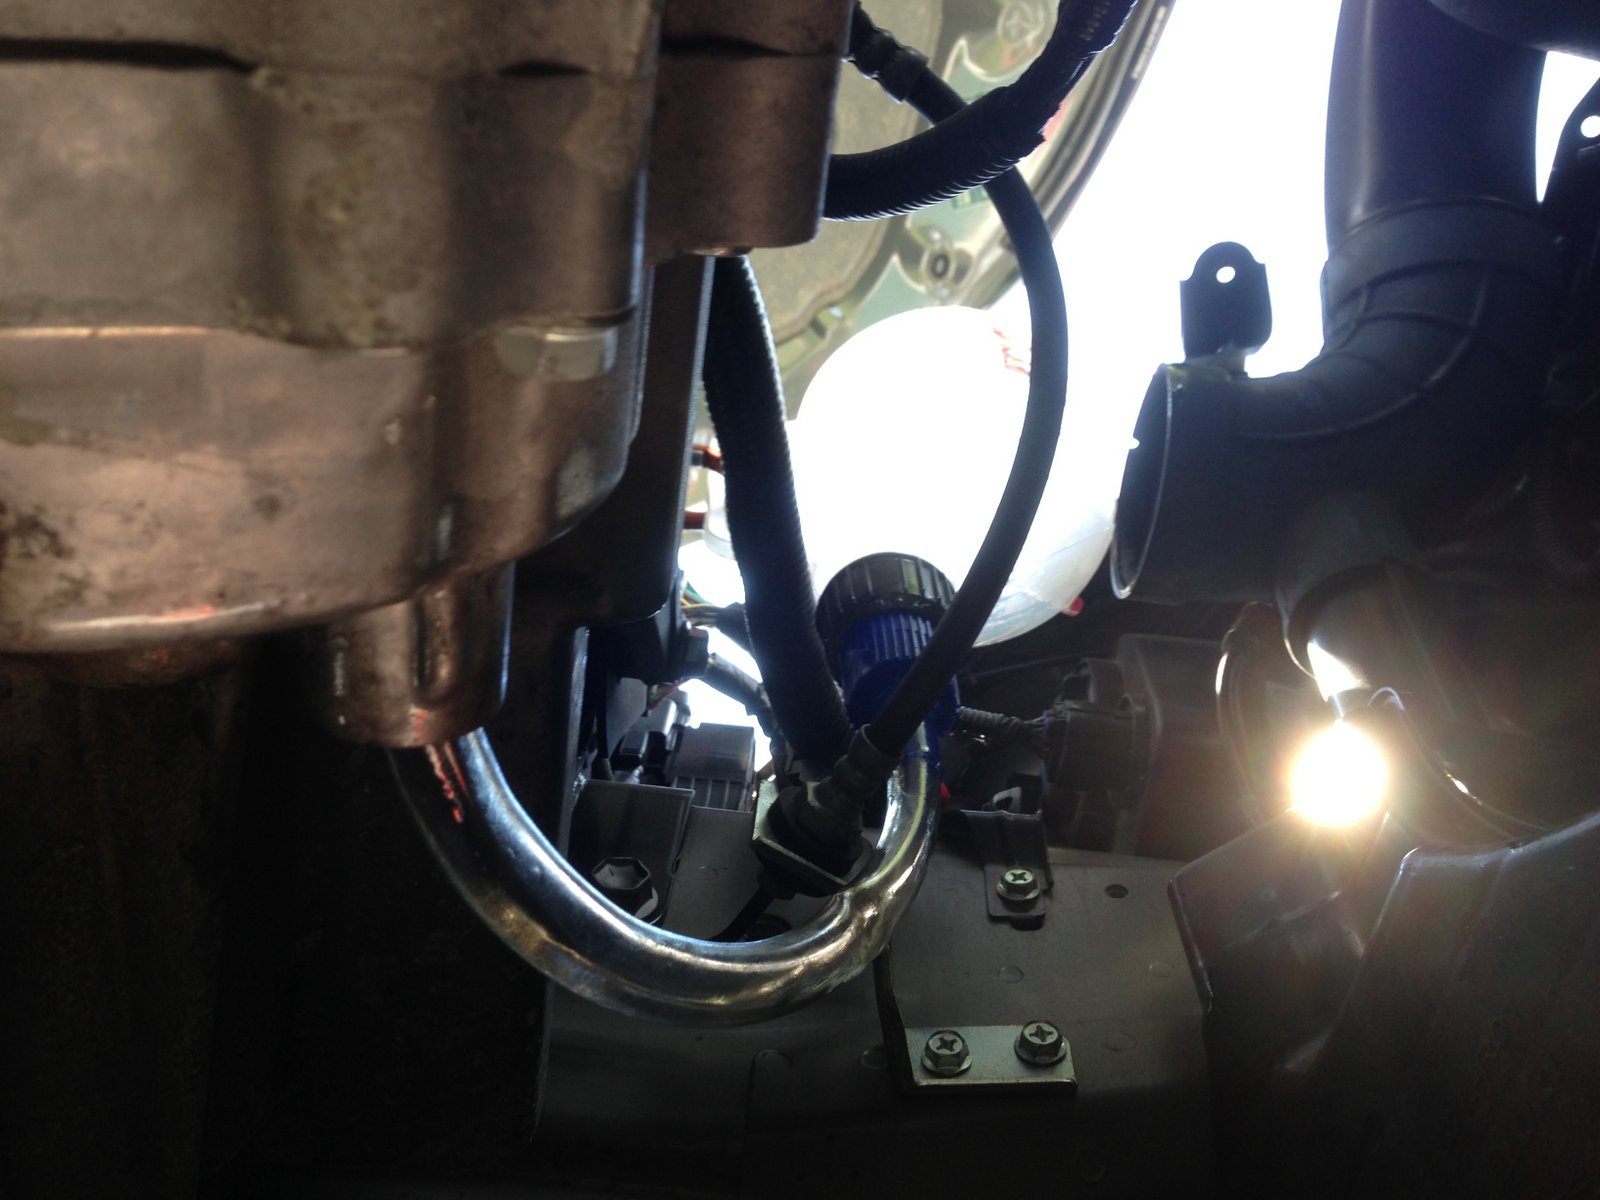 View from under the car of the funnel and hose. Hose goes into filler hole.